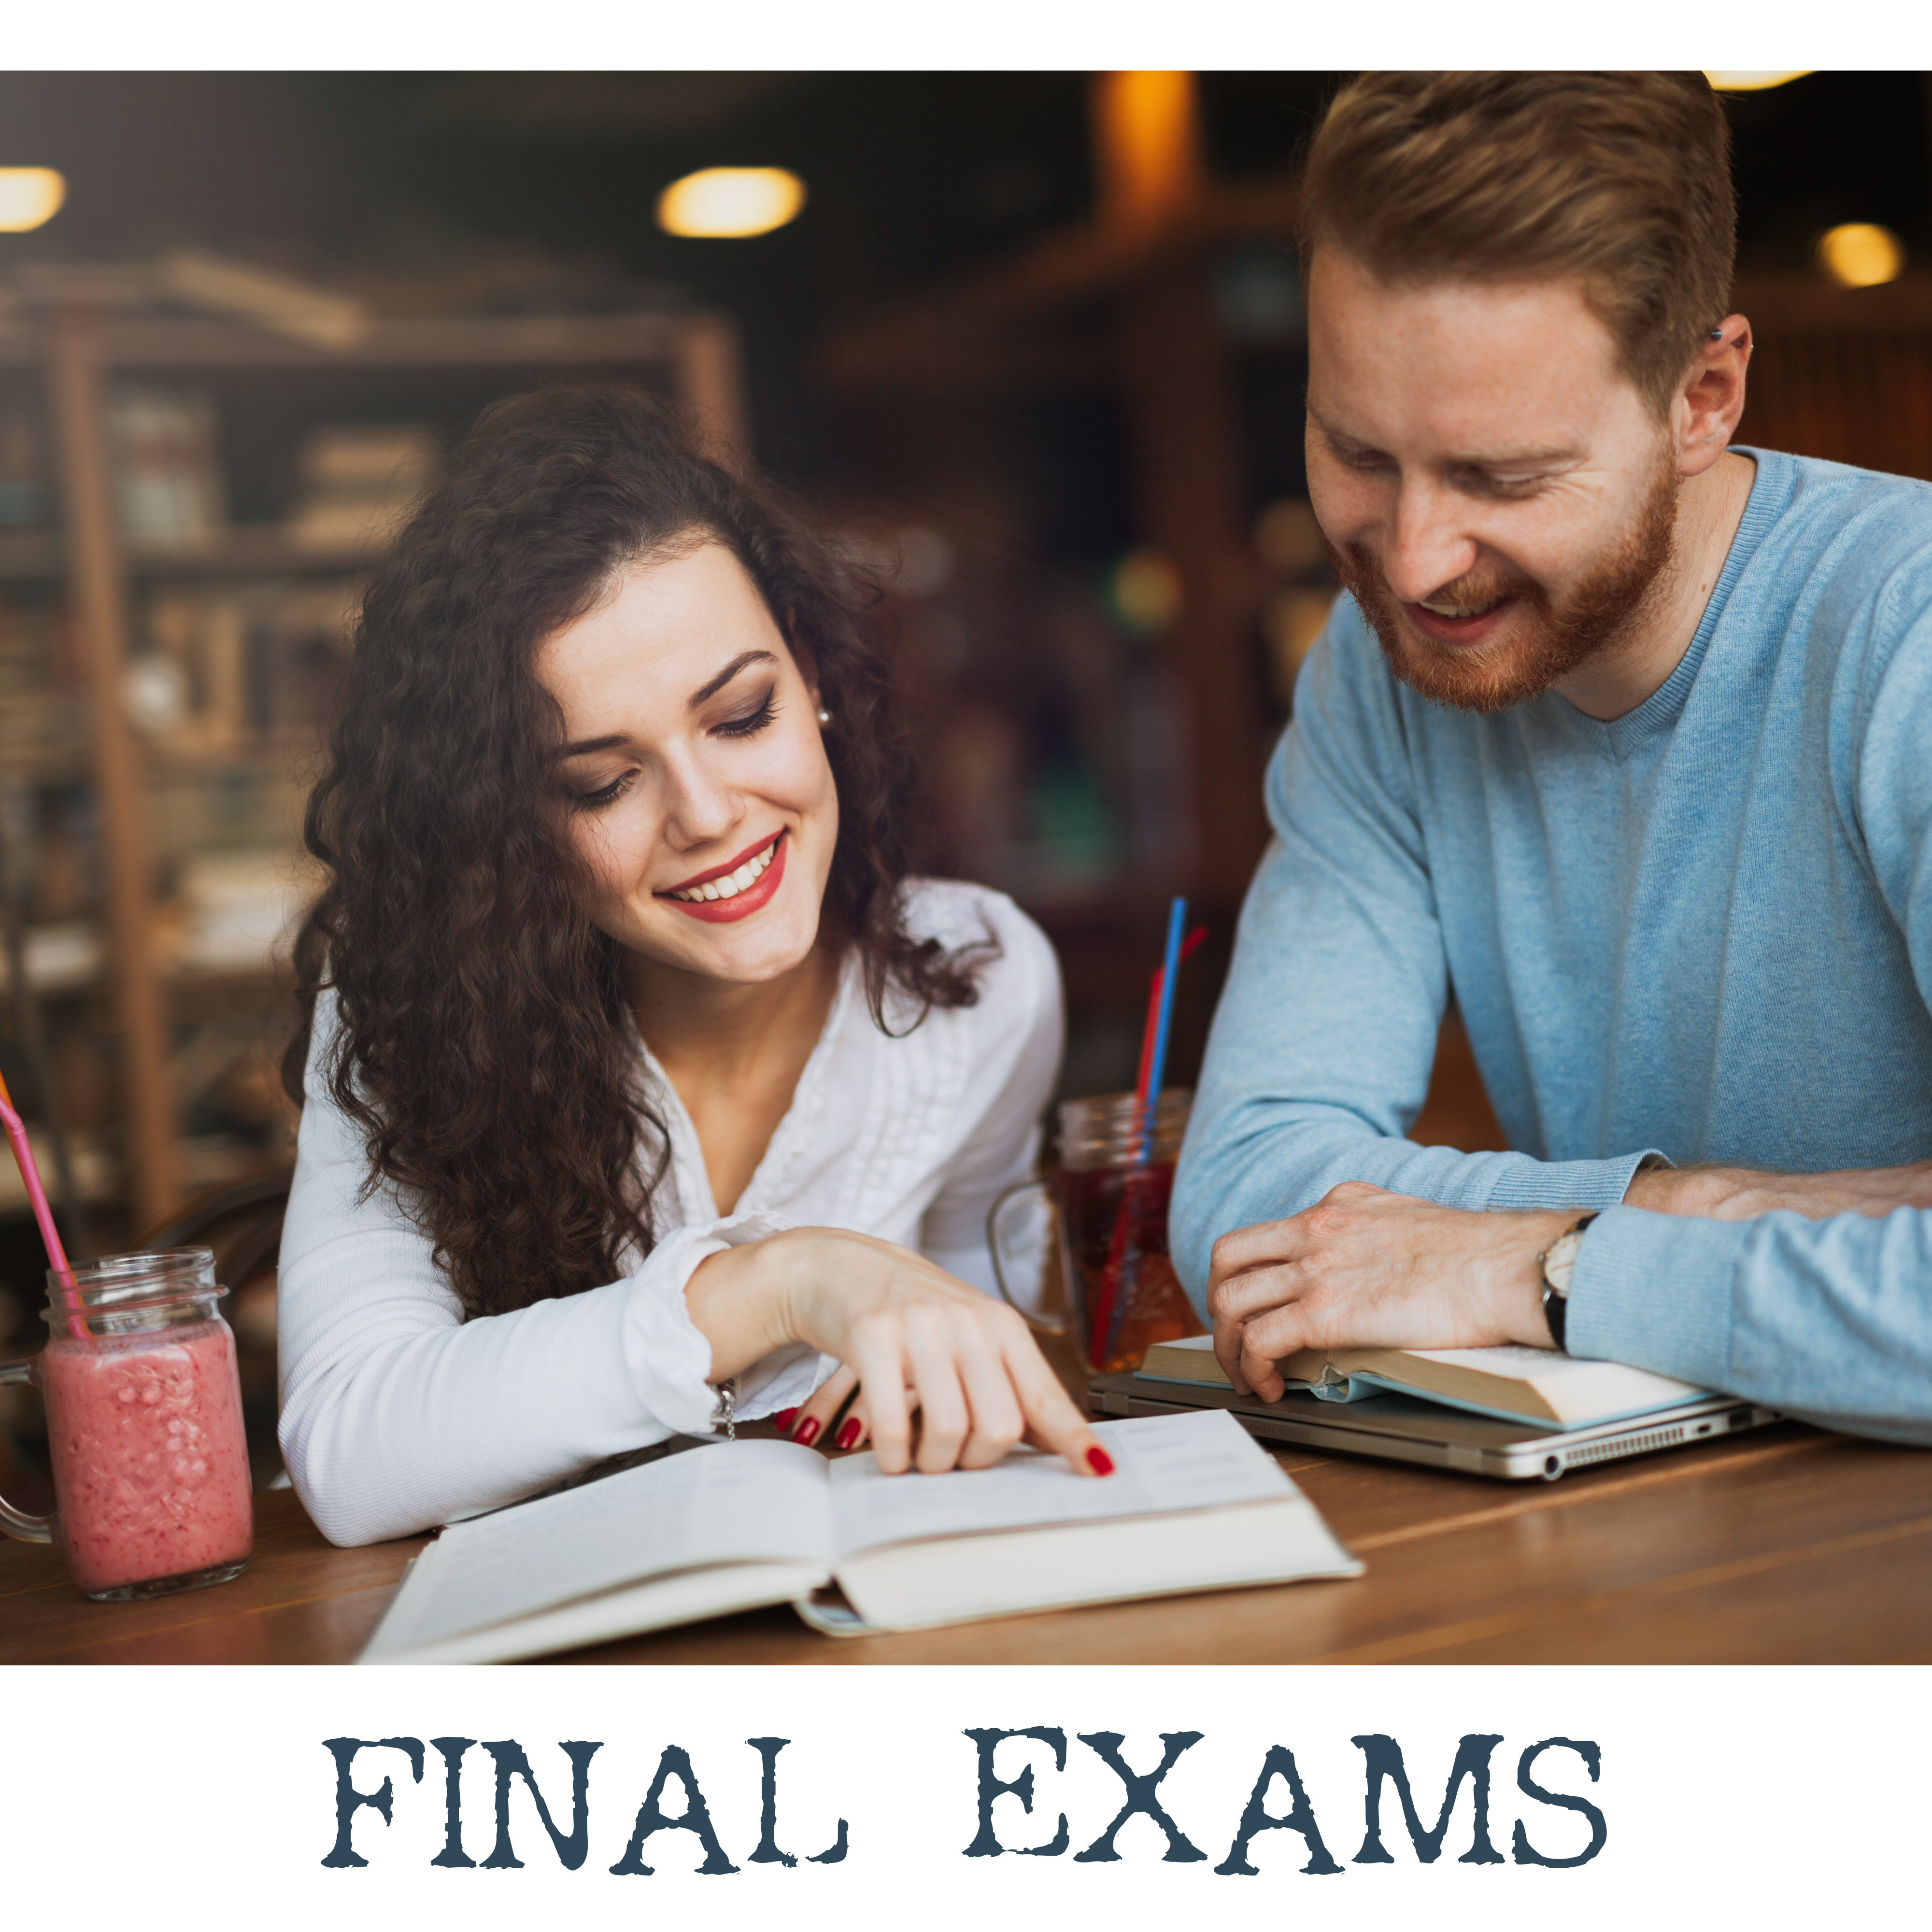 Final Exams: Music for Learning, Reading and Creative Thinking (Helpful during Increased Mental Effort and Memorizing New Knowledge and Information)